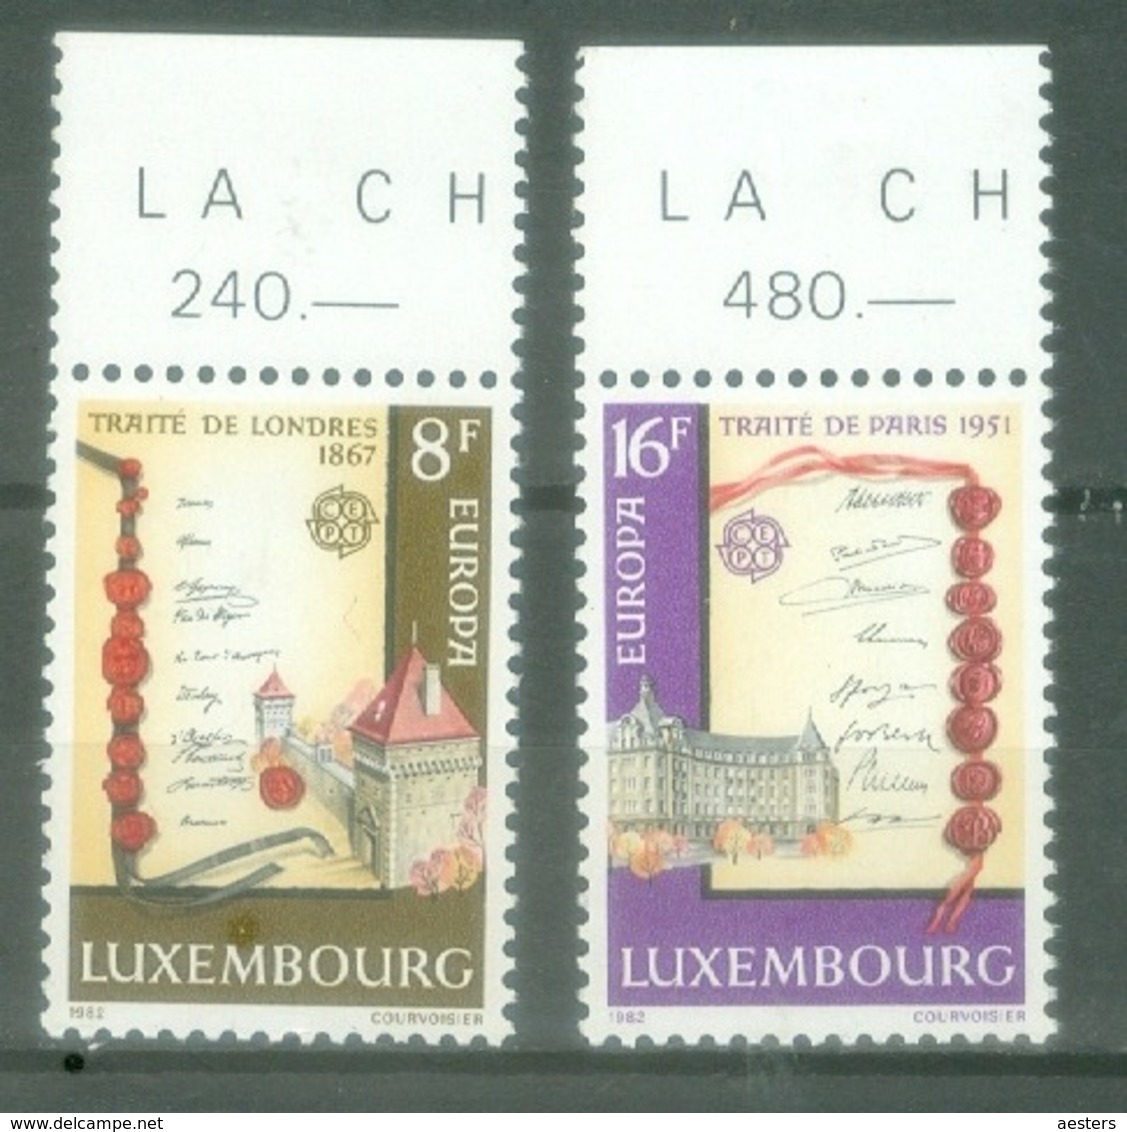 Luxembourg 1982; Europa Cept, Michel 1052-1053.** (MNH) - 1982